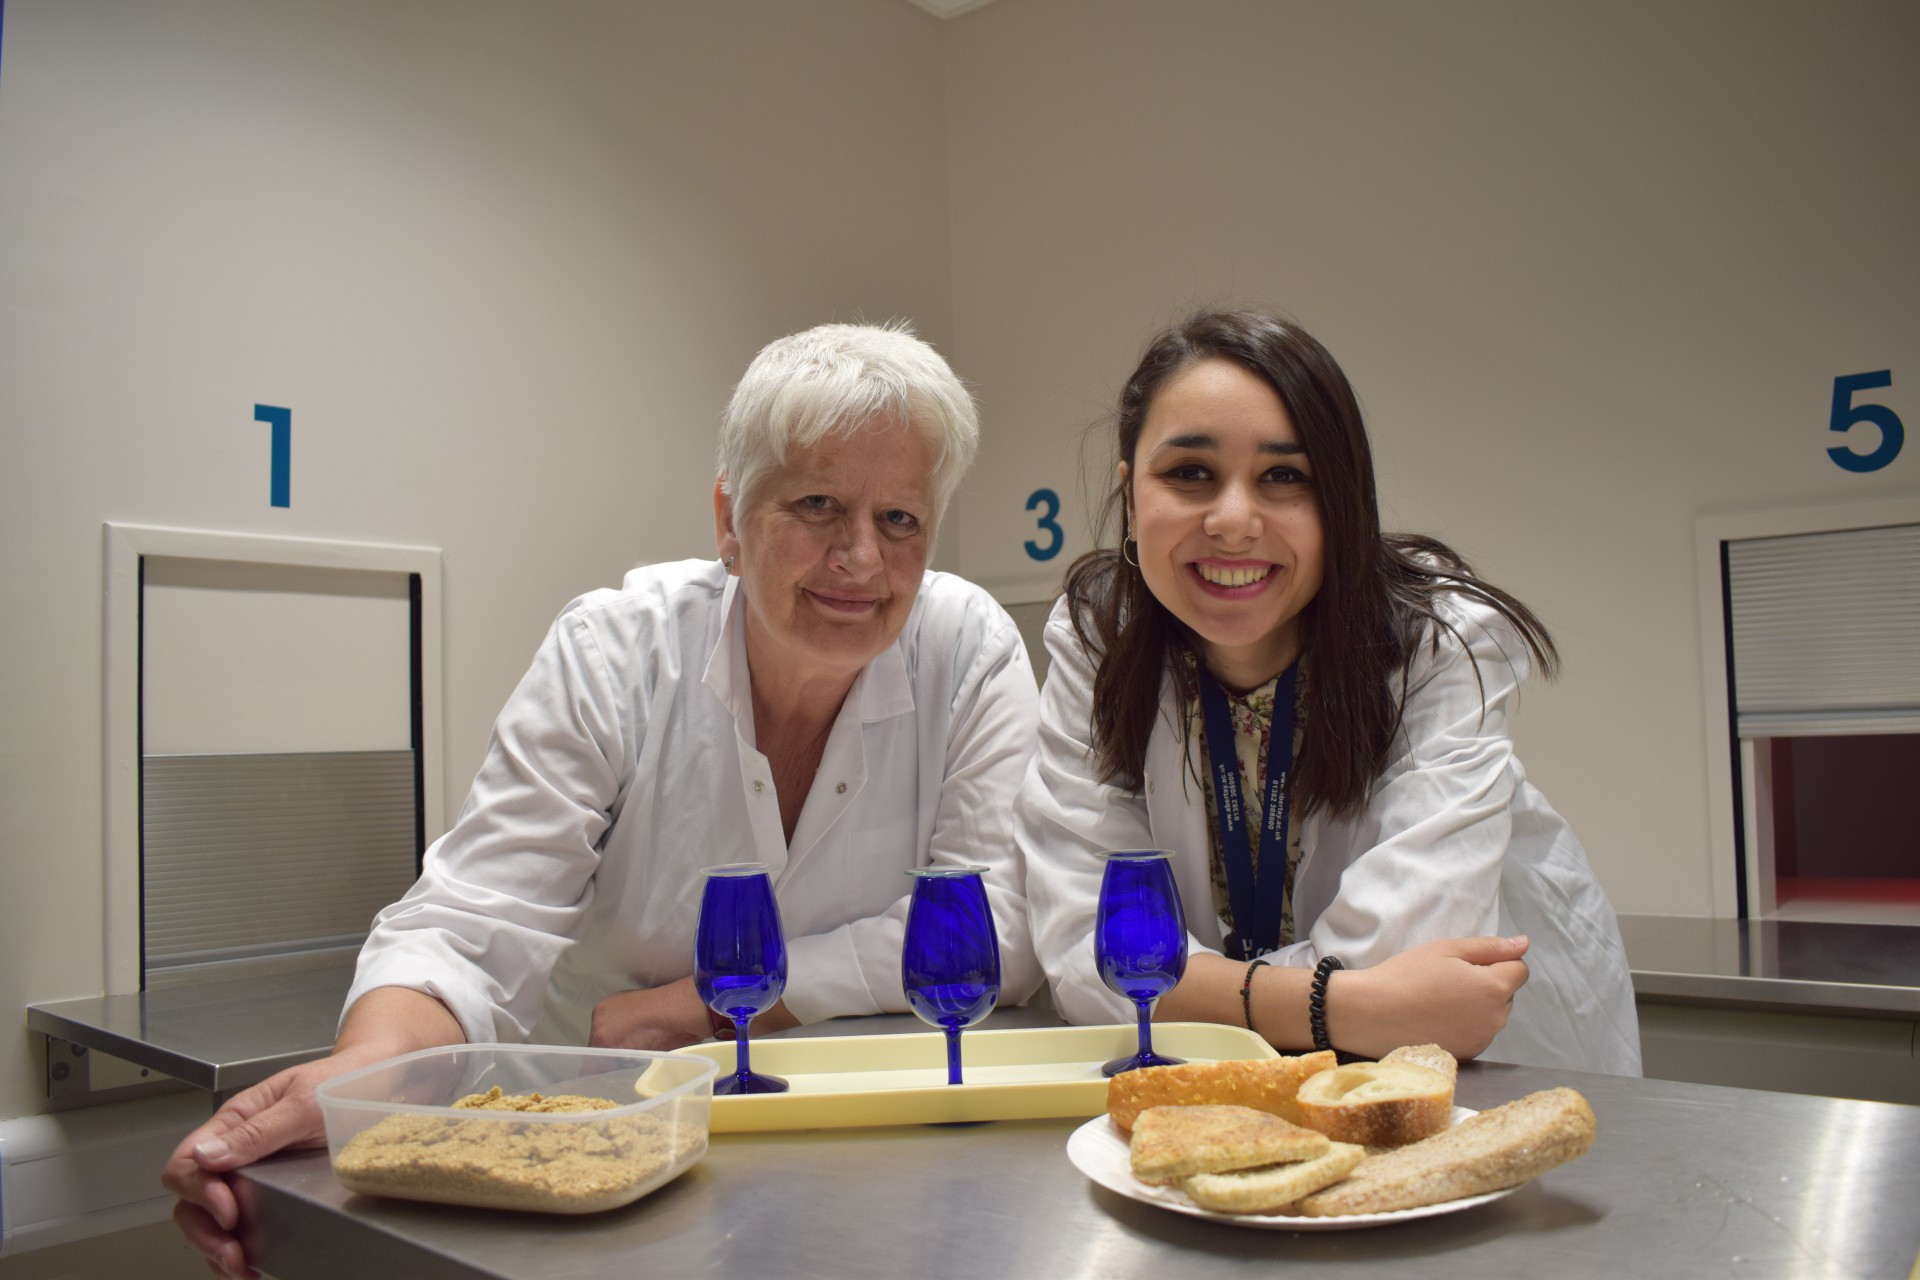 Entrepreneurial spirit! Students make alcohol from old bread